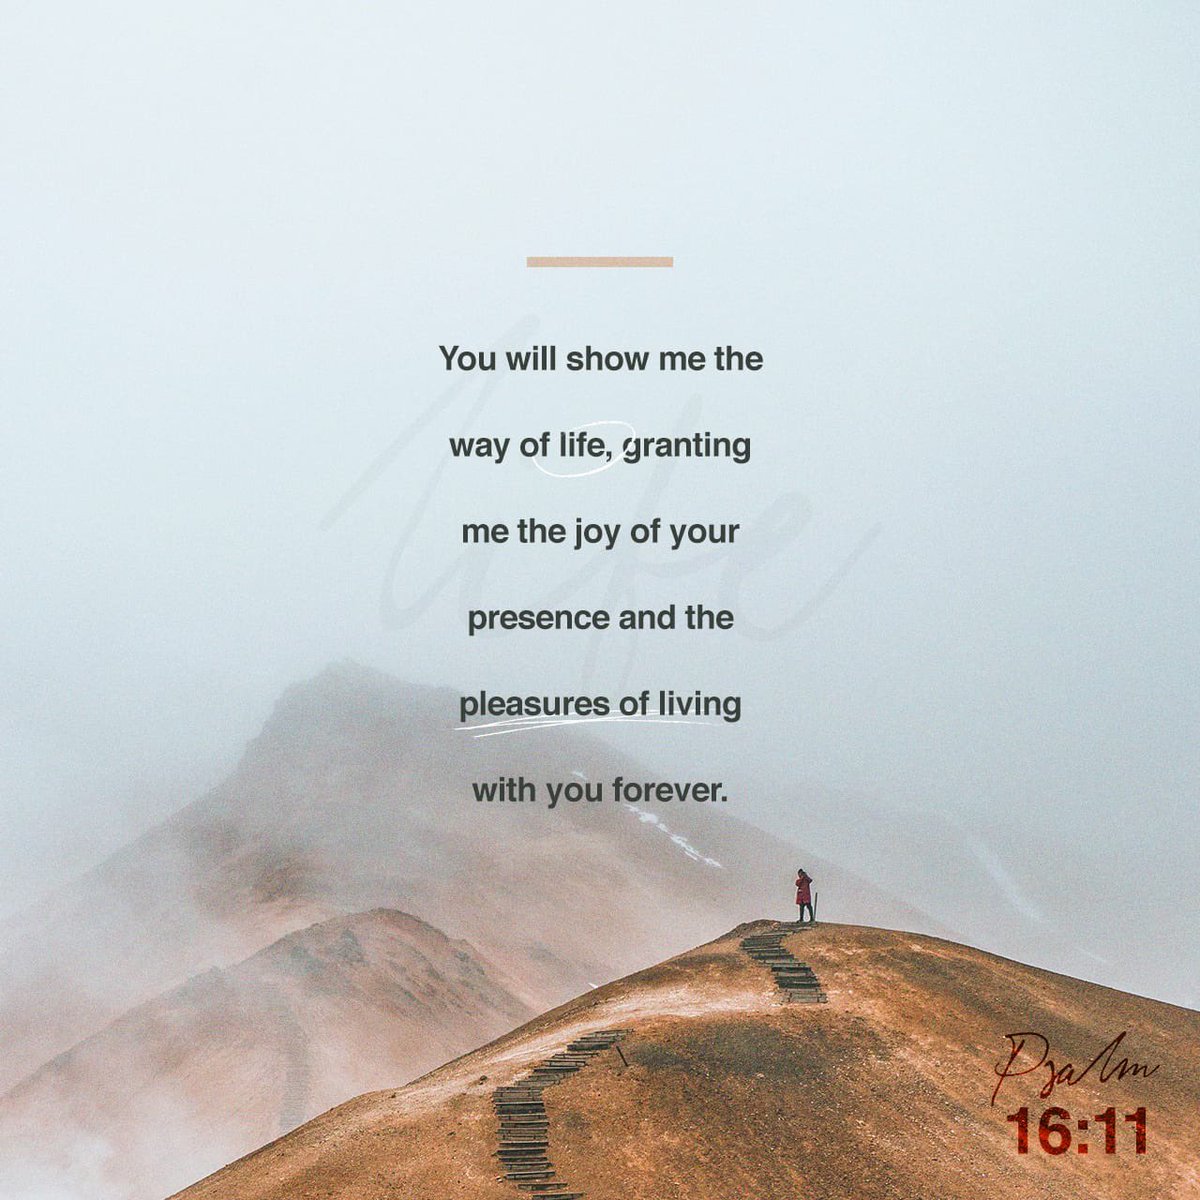 Psalms  16:11 (NASB) “You will make known to me the path of life; In Your presence is fullness of joy; In Your right hand there are pleasures forever.”

#sharing #faith #Bible #Gospel #Scripture #ReadTheBible #ReadYourBible #BibleExposition #NewAmericanStandardBible #Wednesday